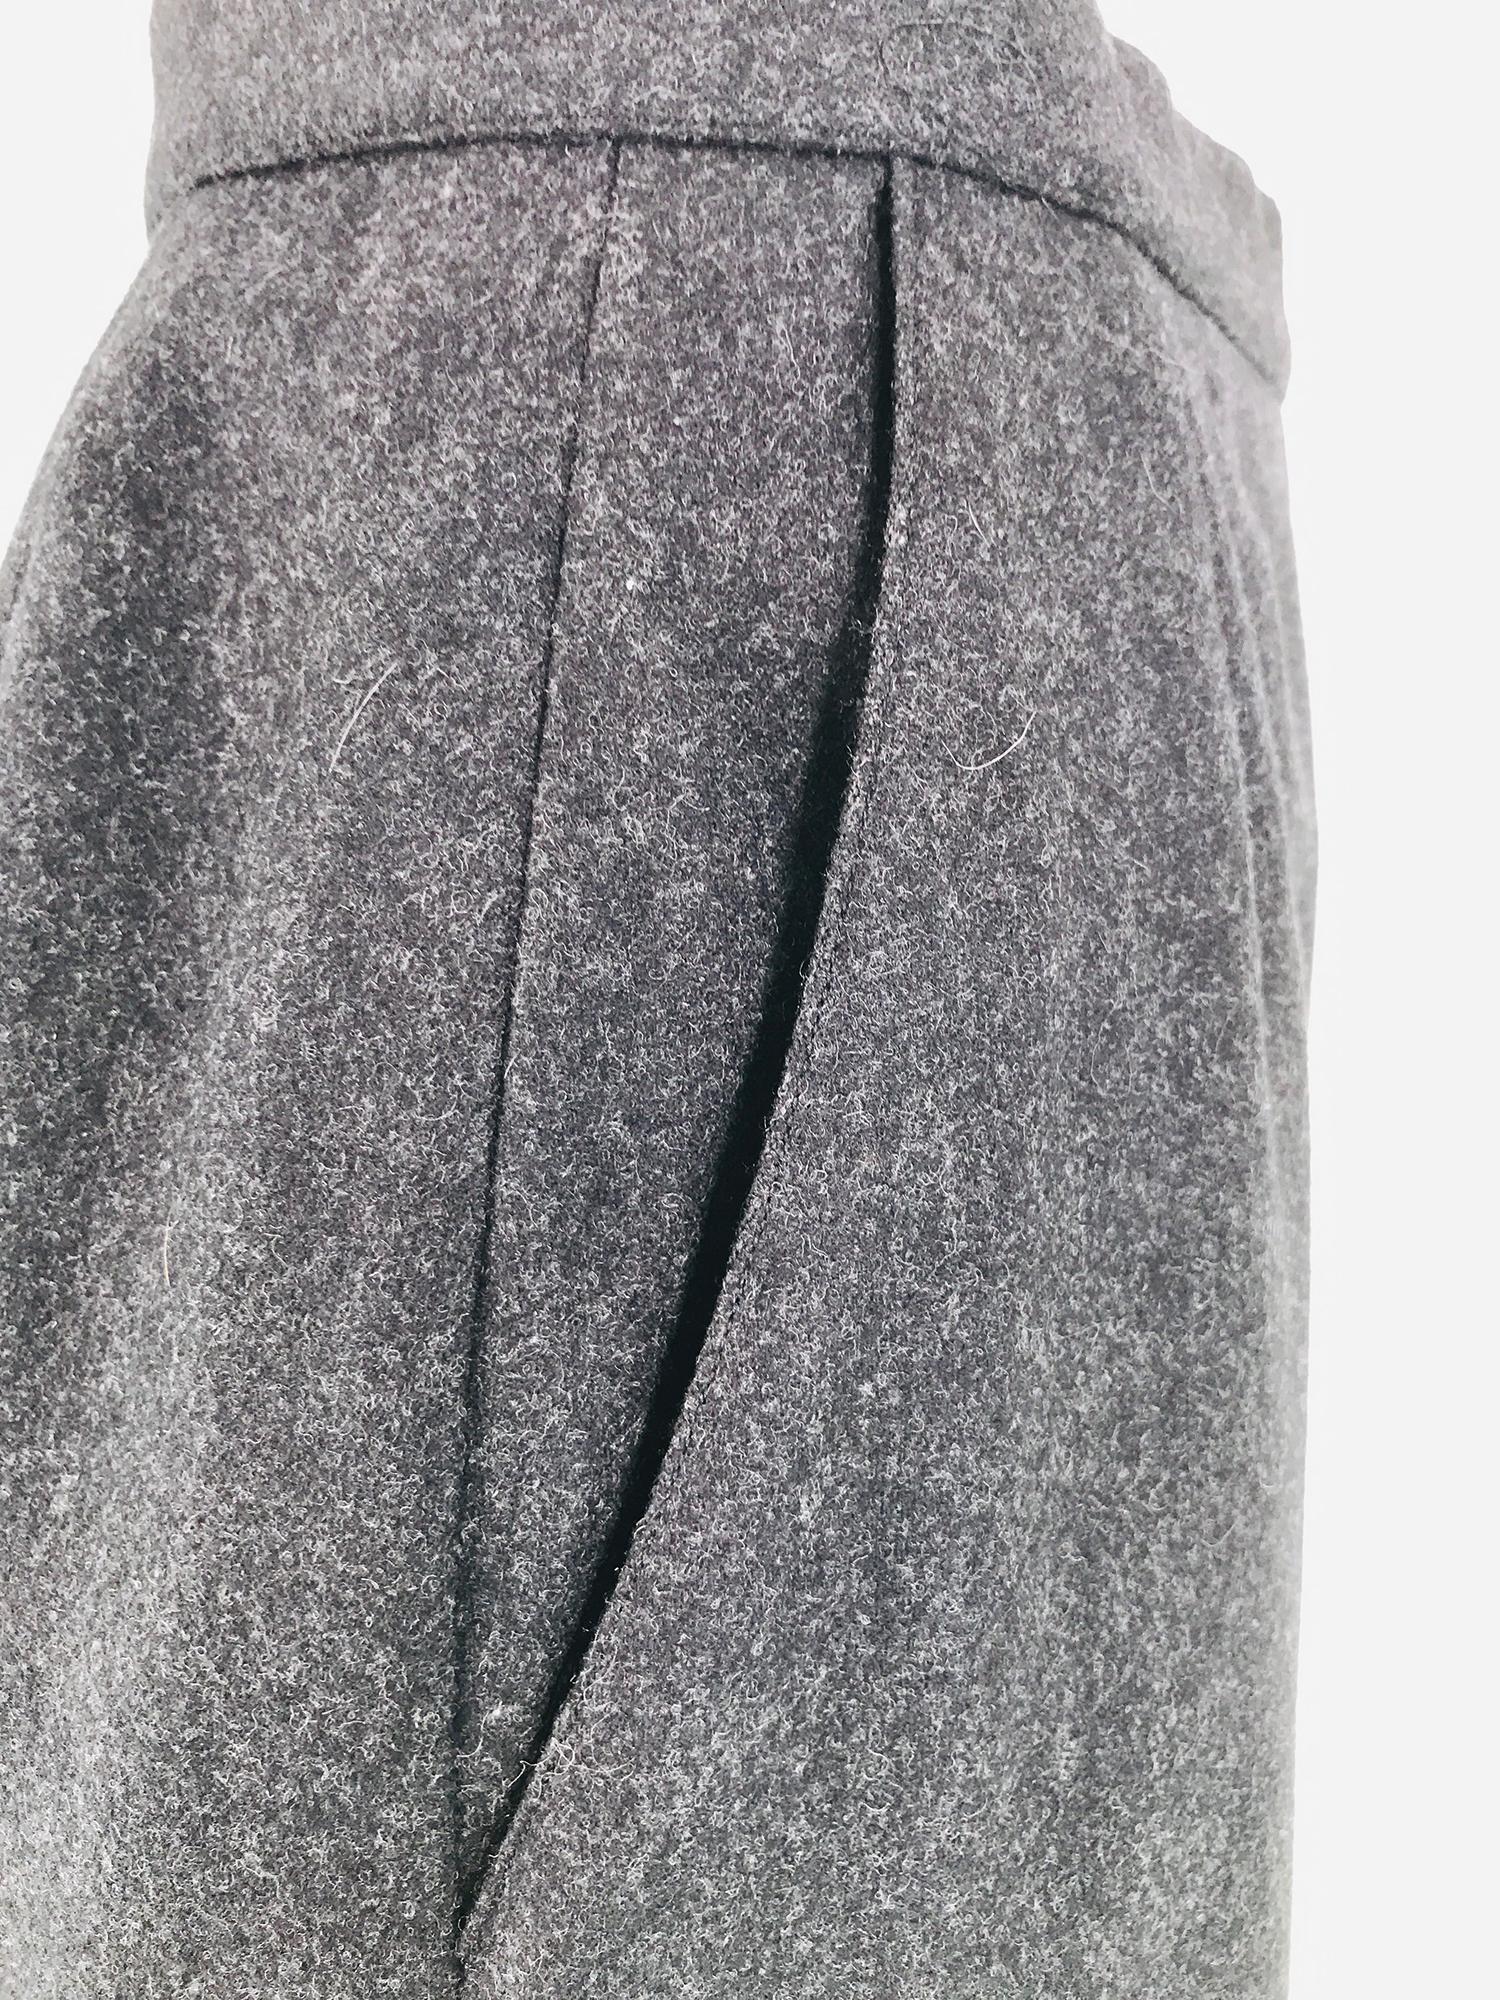 Chanel Charcoal Wool Kick Pleat Front Pocket Pencil Skirt Vintage For Sale 5